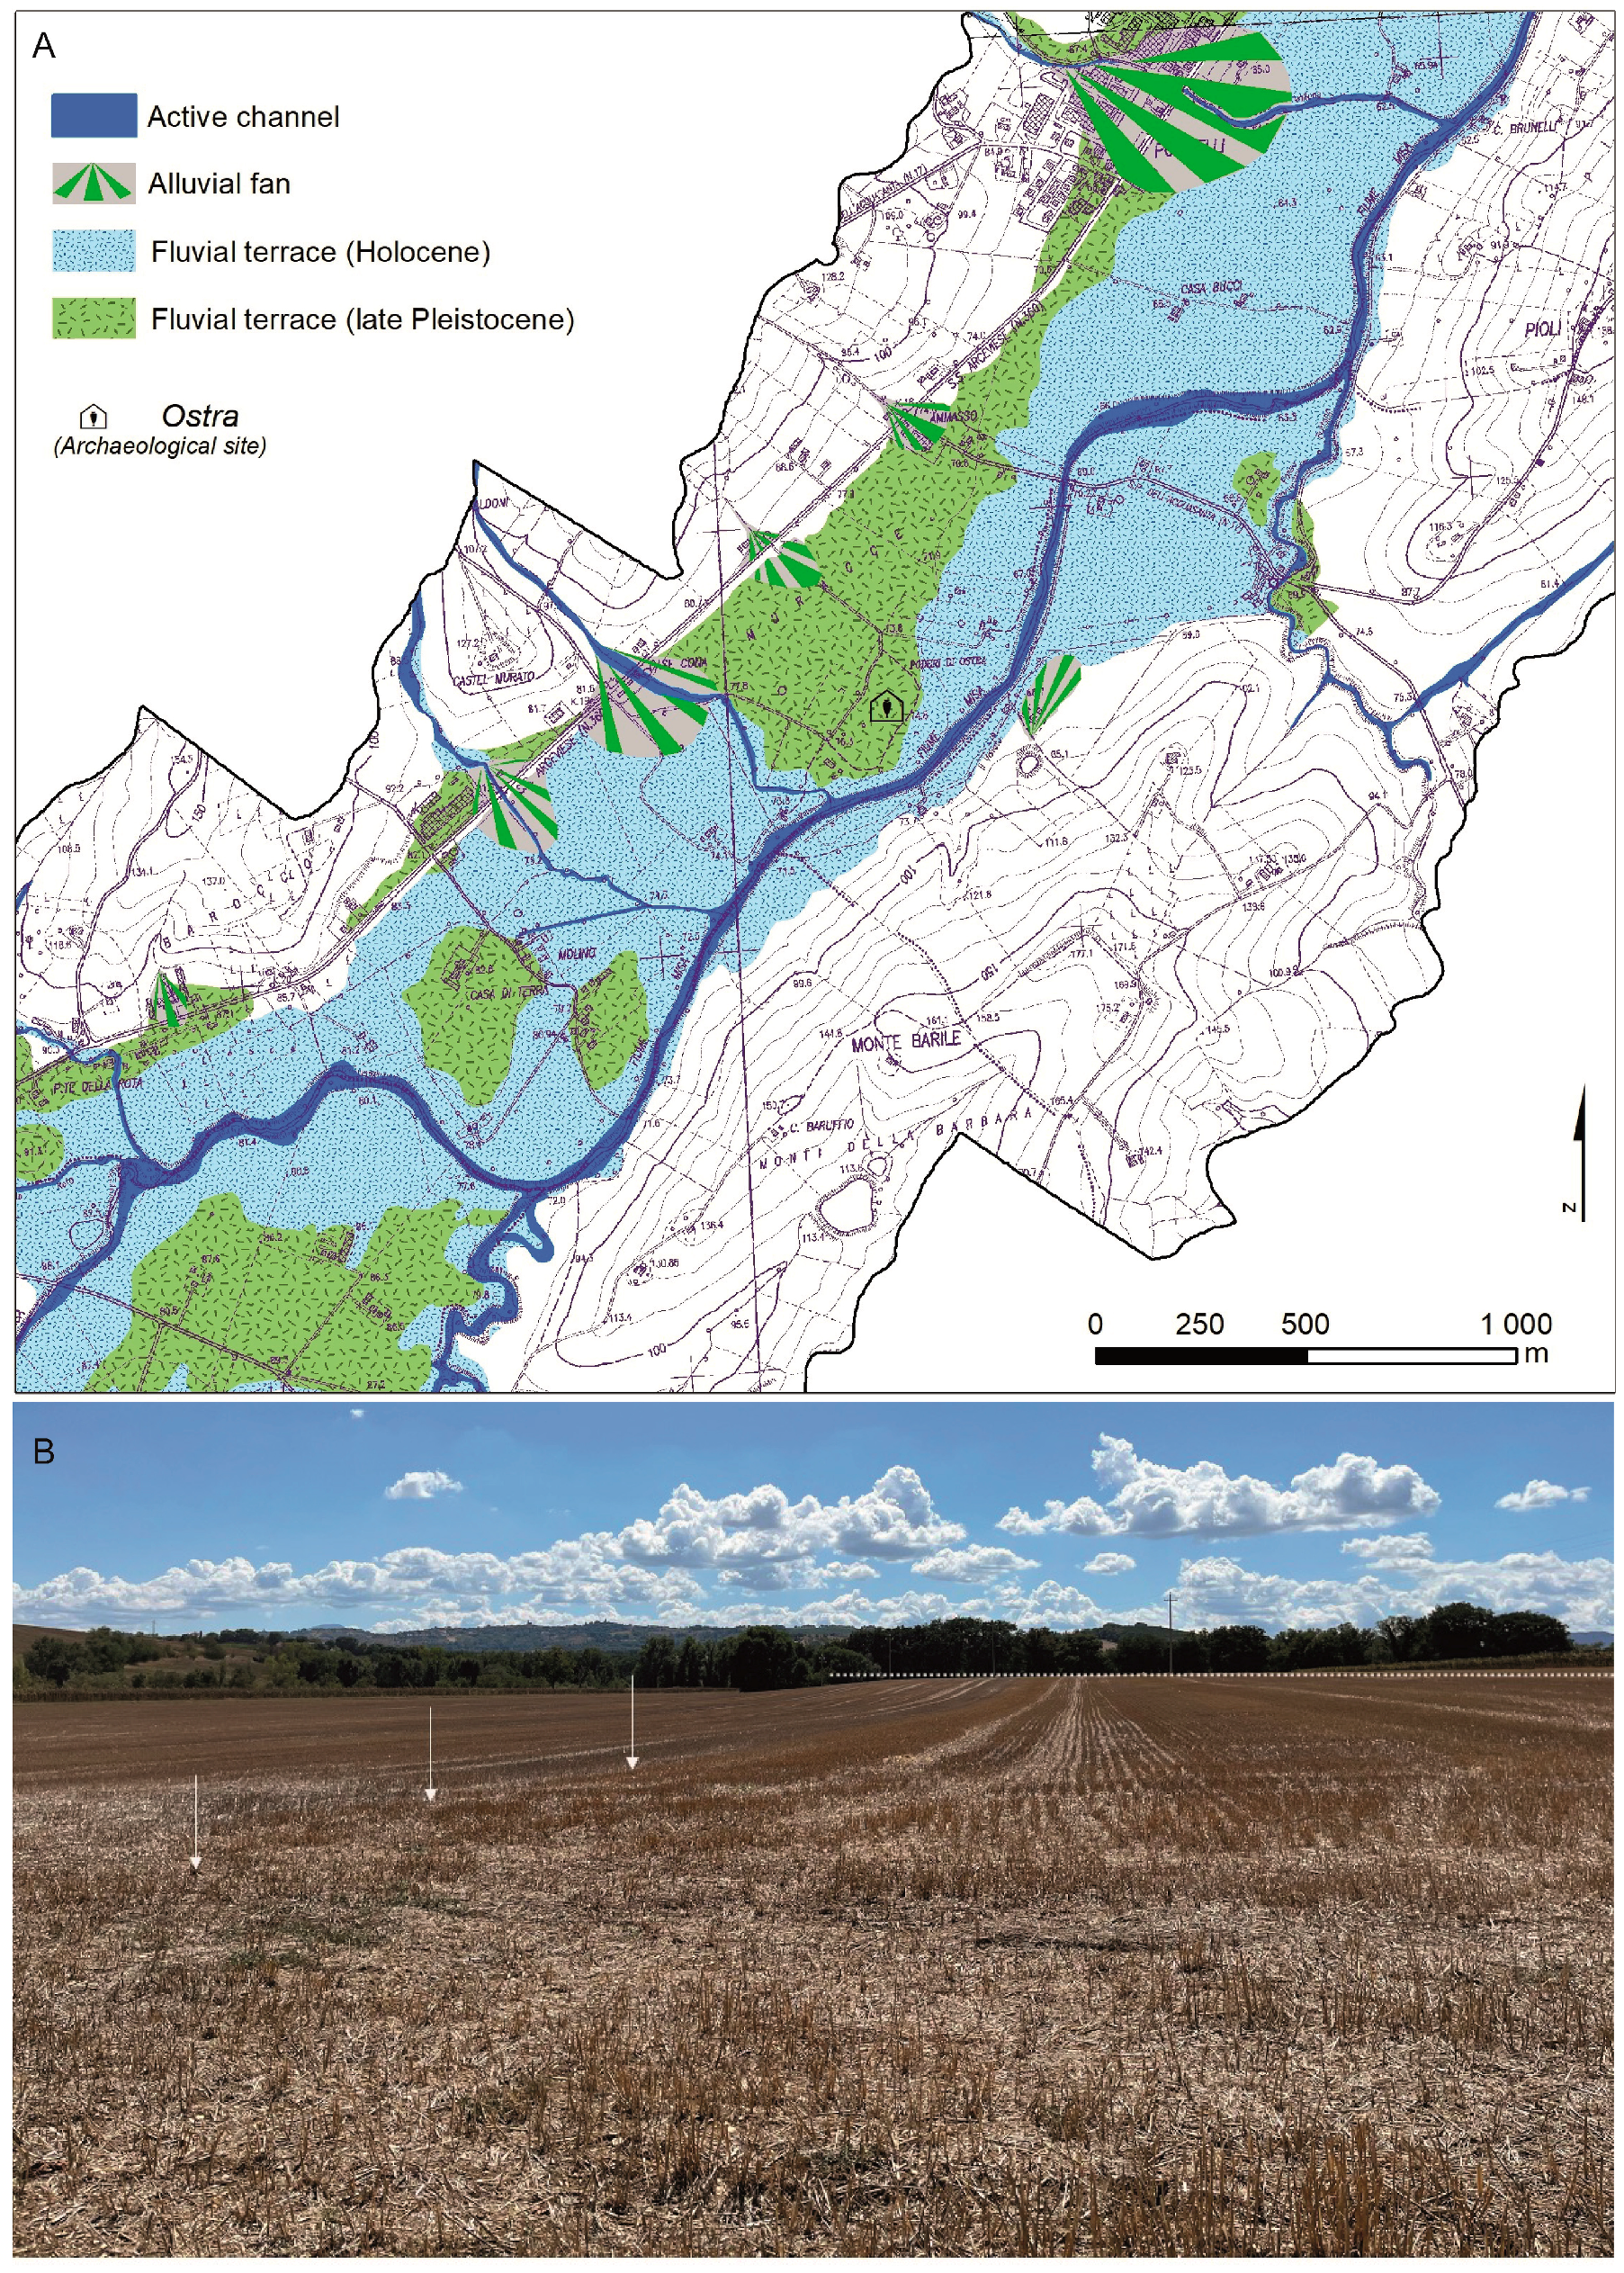 Geosciences | Free Full-Text | Enhancing the Identification and Mapping of  Fluvial Terraces Combining Geomorphological Field Survey with Land-Surface  Quantitative Analysis